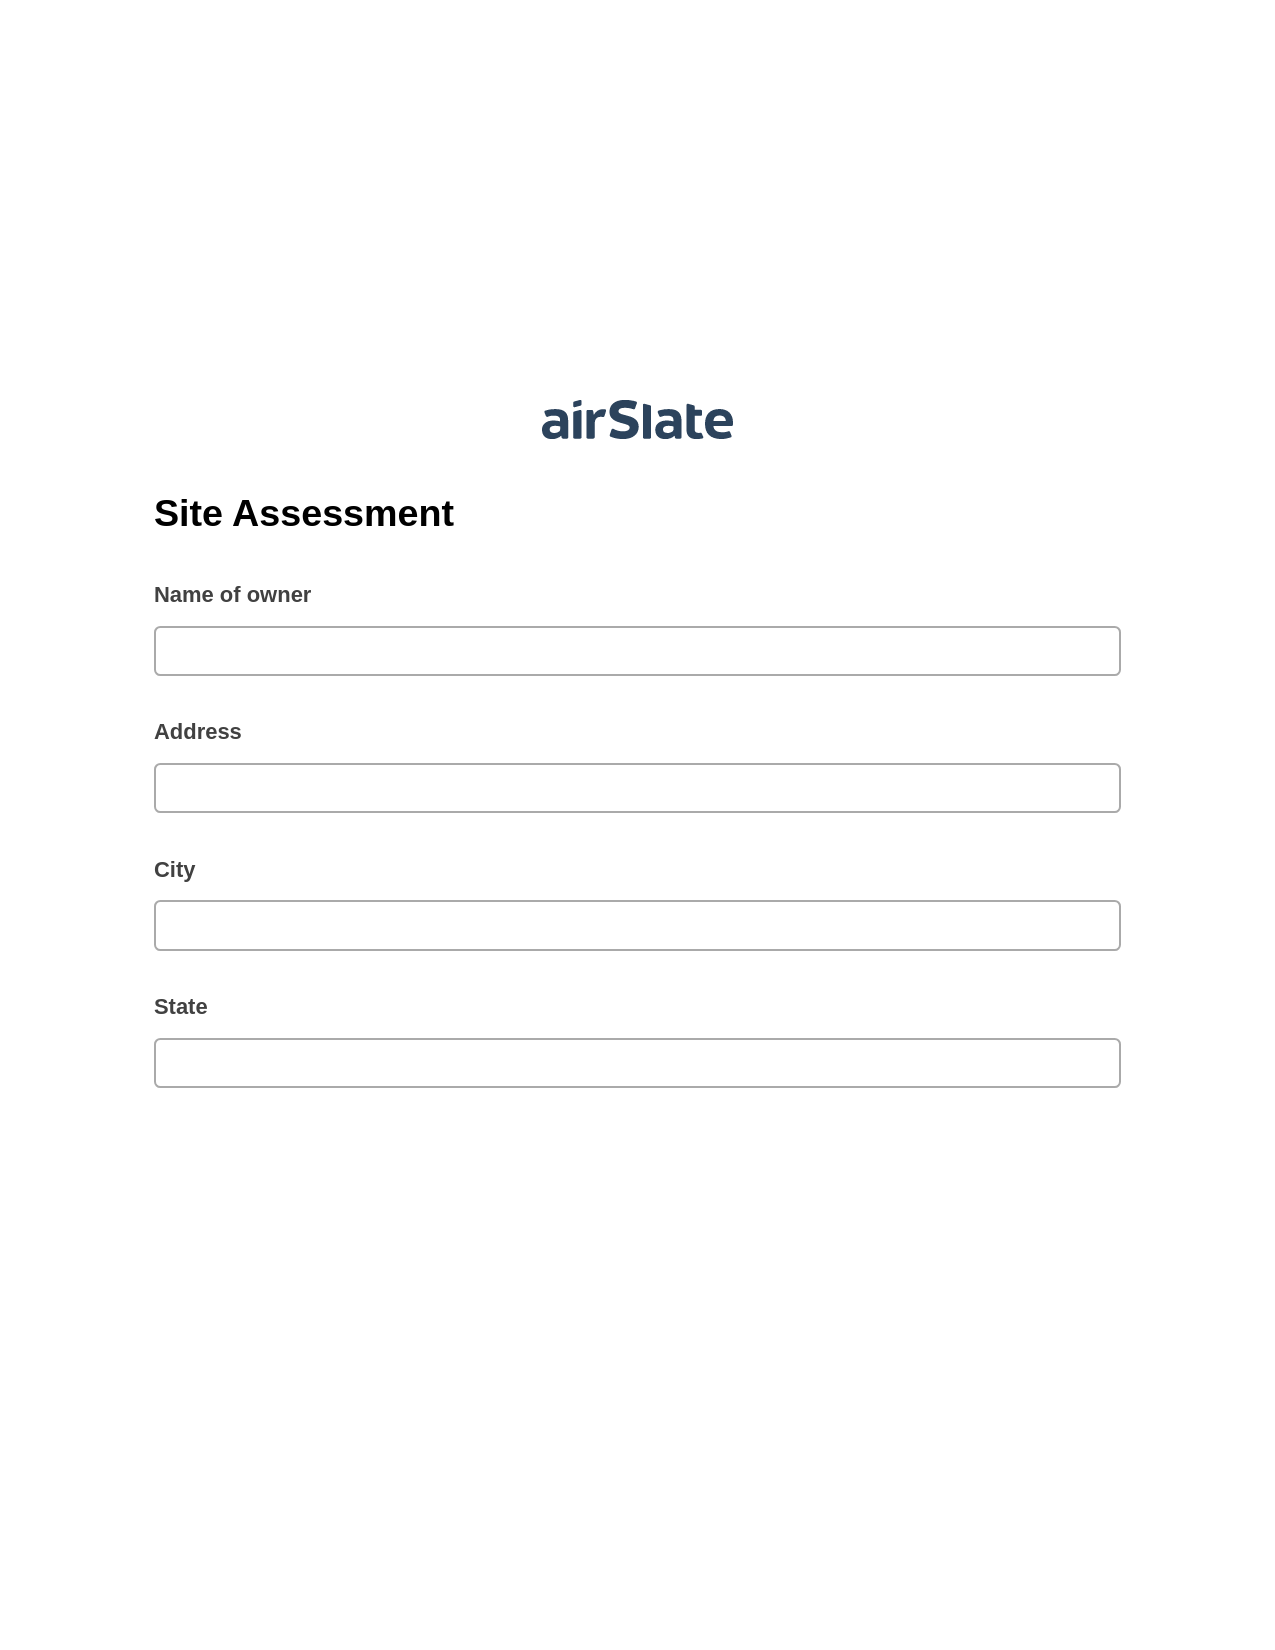 Multirole Site Assessment Pre-fill from CSV File Bot, Audit Trail Bot, Archive to SharePoint Folder Bot